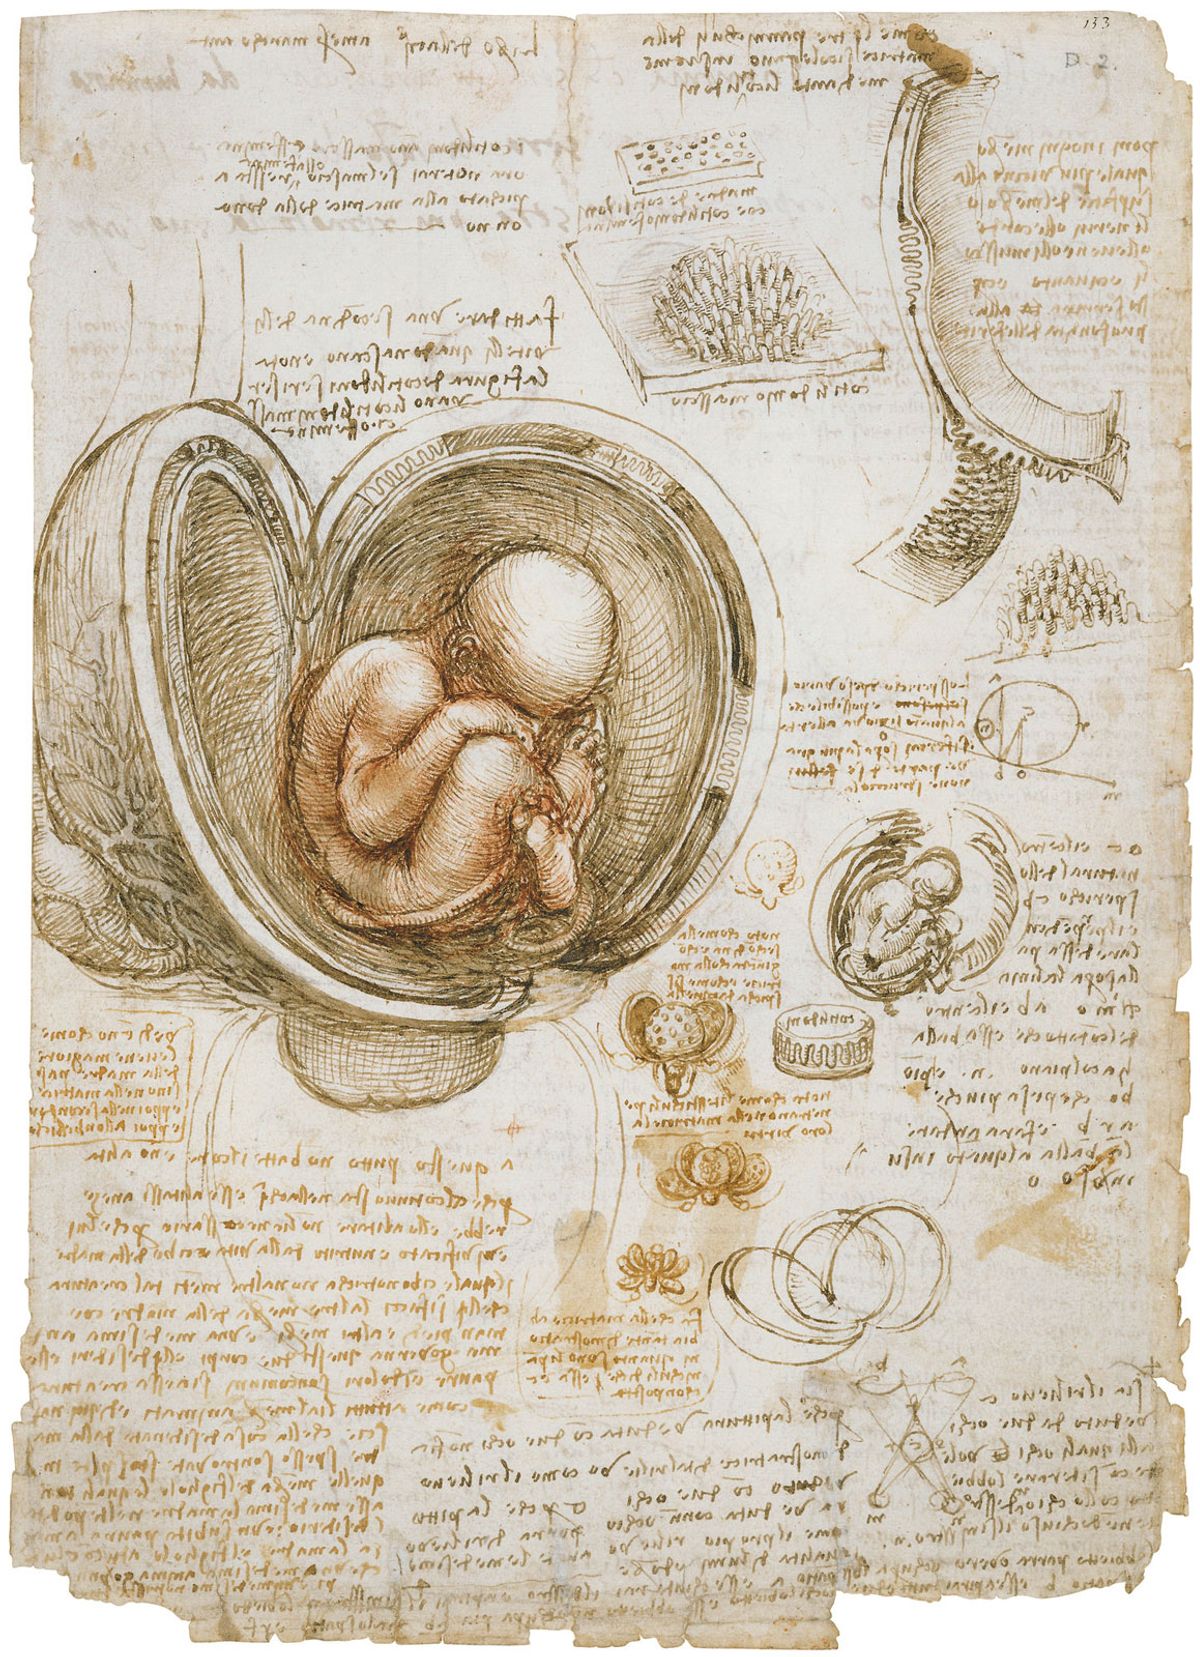 Leonardo da Vinci's The fetus in the womb (around 1511) is on show at the Queen's Gallery © Her Majesty Queen Elizabeth II 2019; Royal Collection Trust